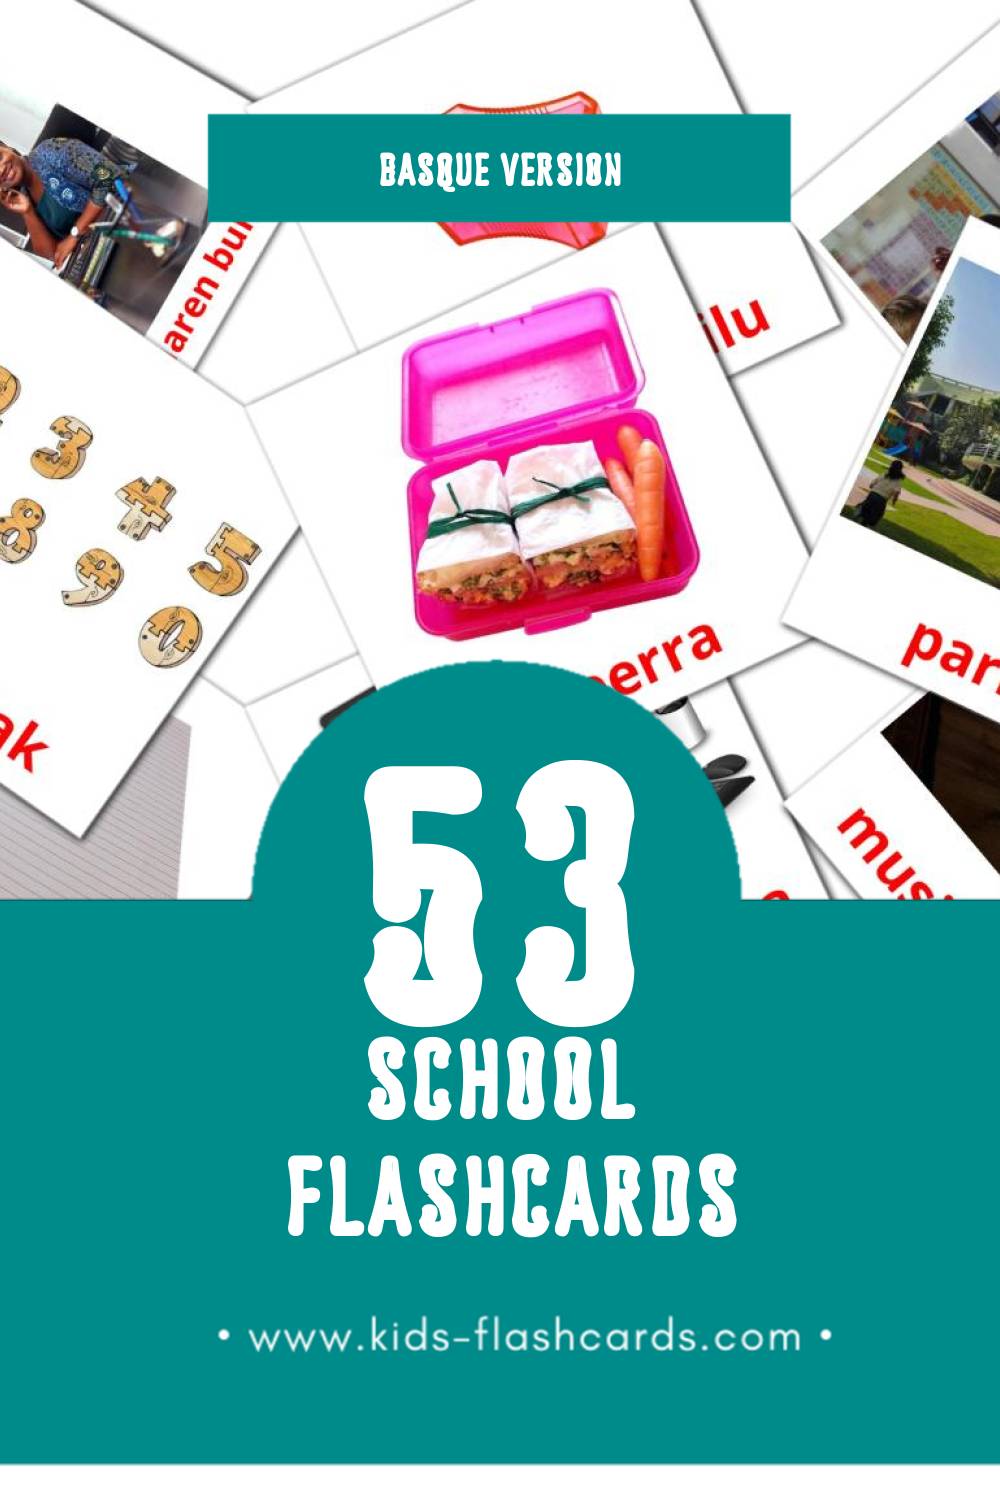 Visual Eskola Flashcards for Toddlers (53 cards in Basque)